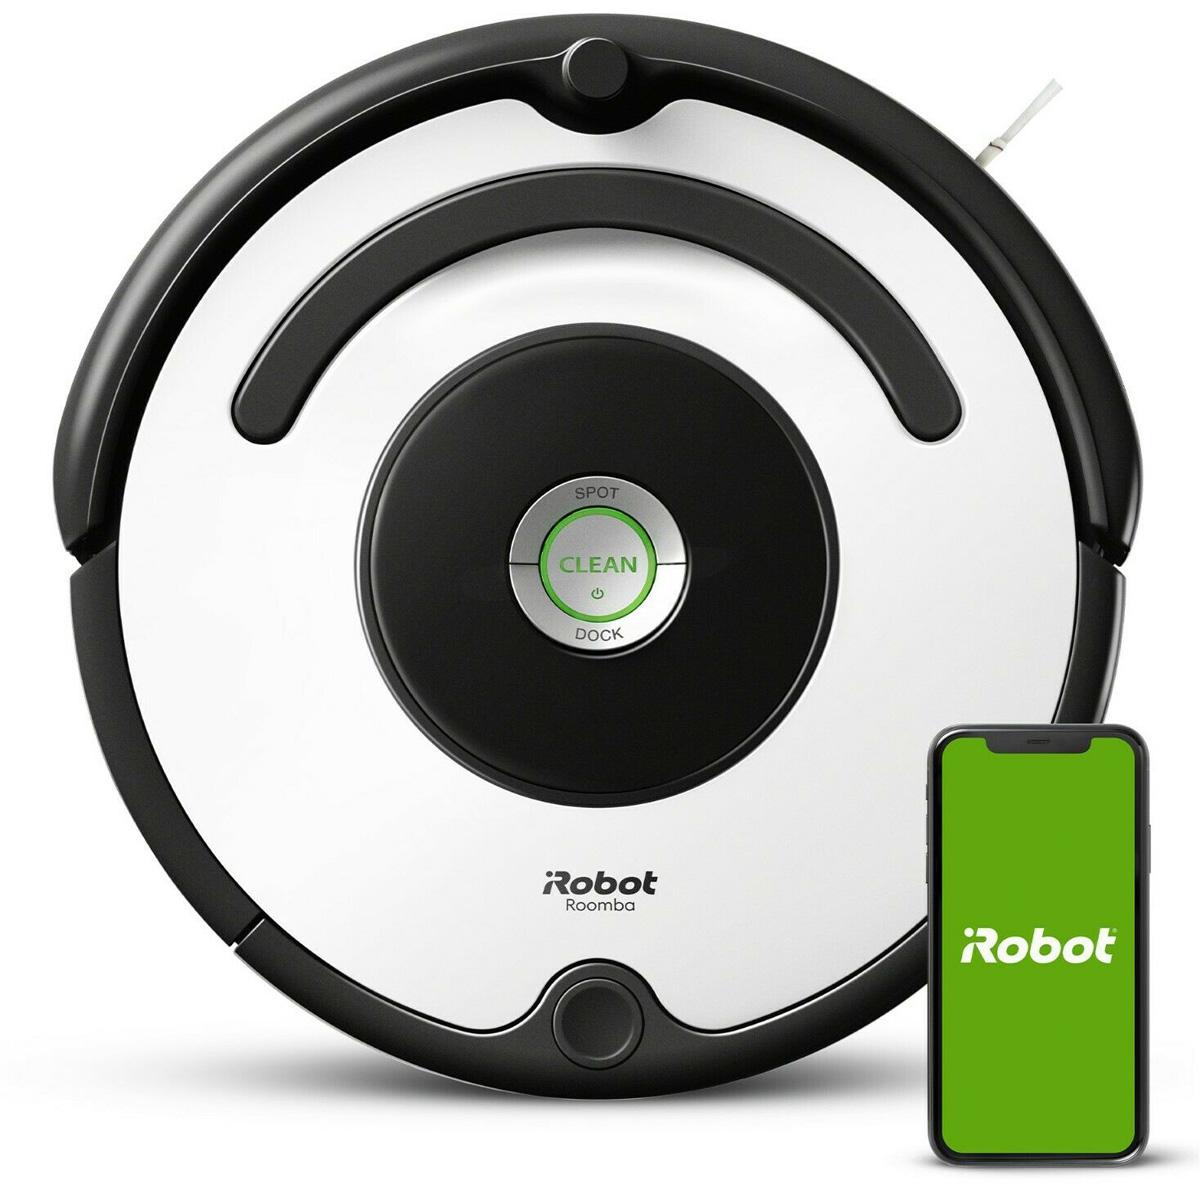 iRobot Roomba 670 Vacuum Cleaning Robot for $178.19 Shipped